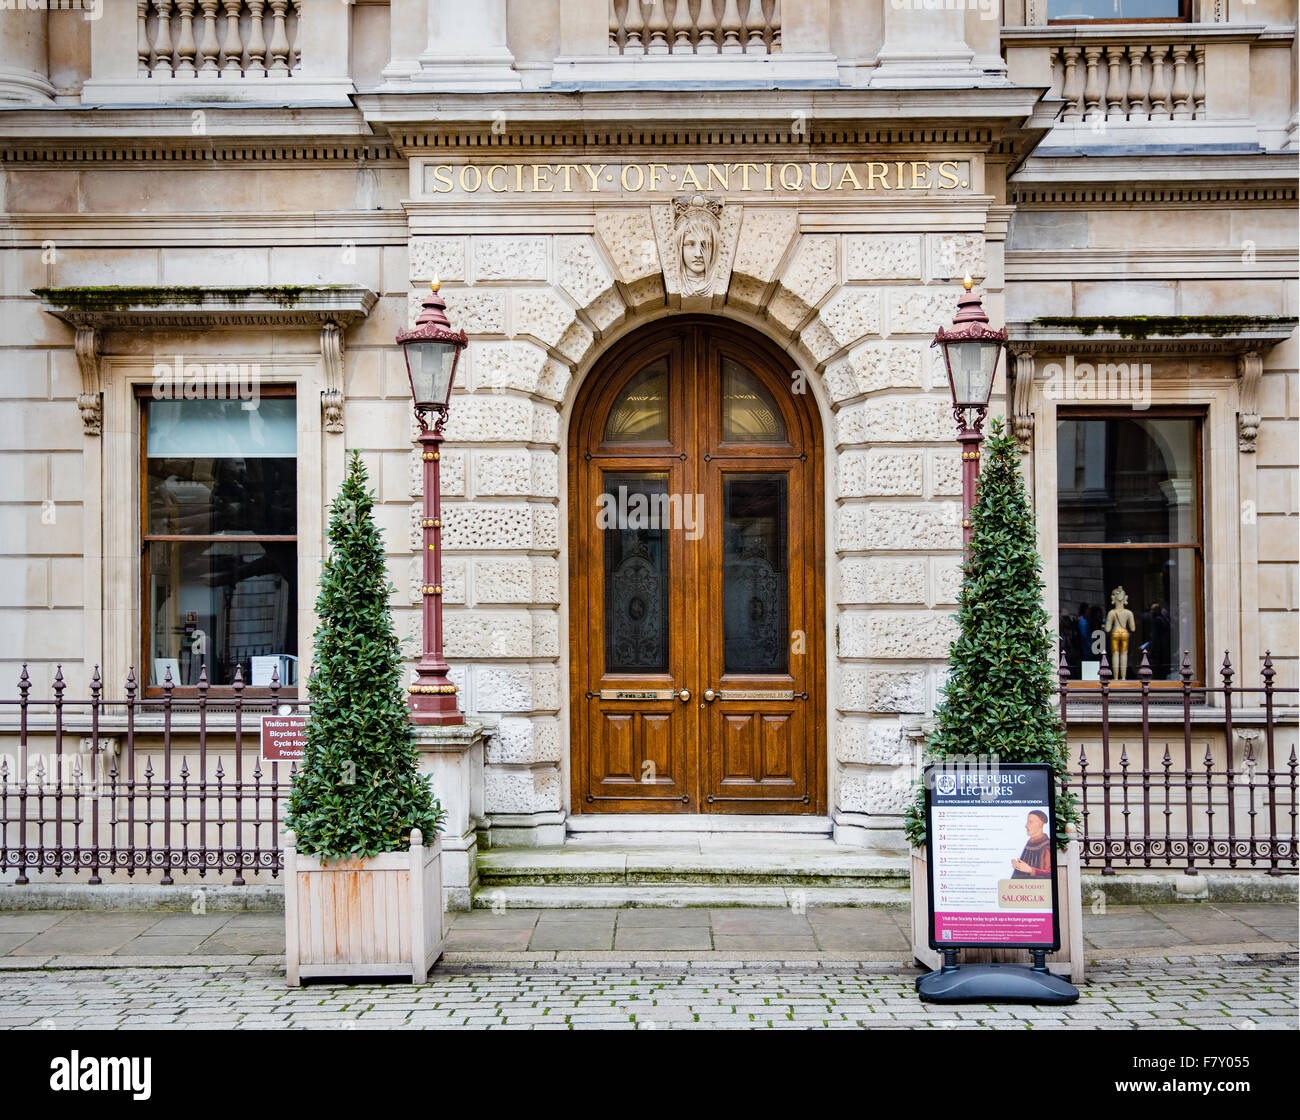 Entrance door to the Society of Antiquaries in the yard of the Royal Academy on Piccadilly in Mayfair London UK Stock Photo